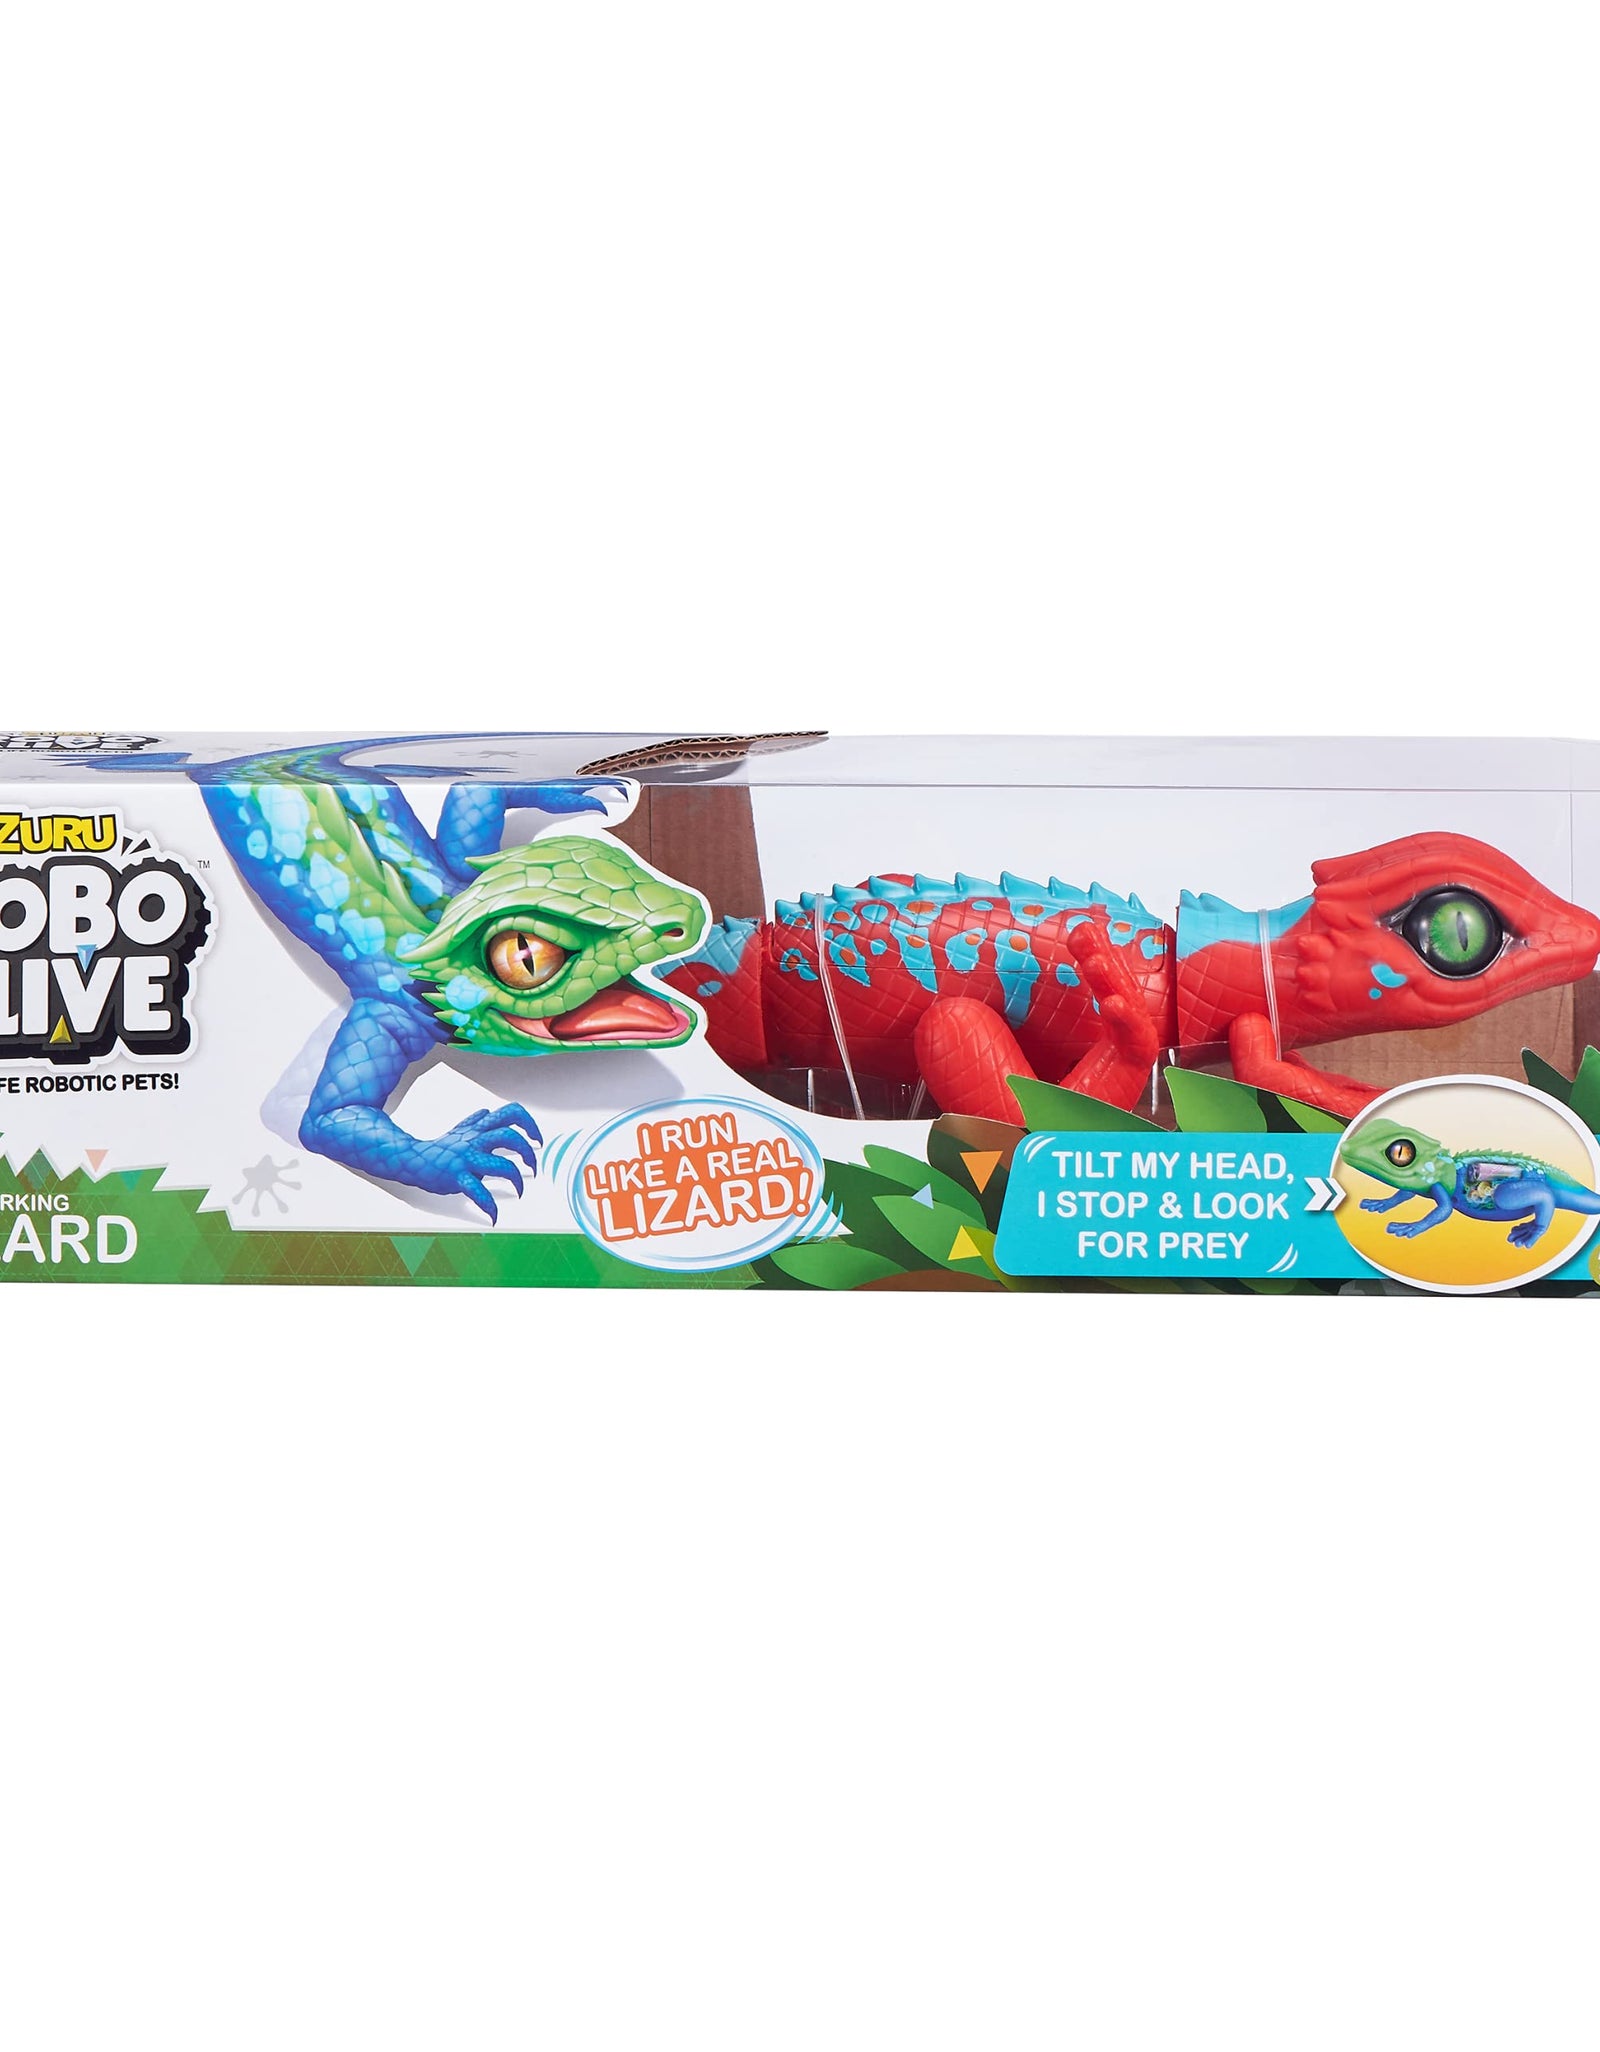 Robo Alive Lurking Lizard Battery-Powered Robotic Toy (Red + Blue) Series 2, Small